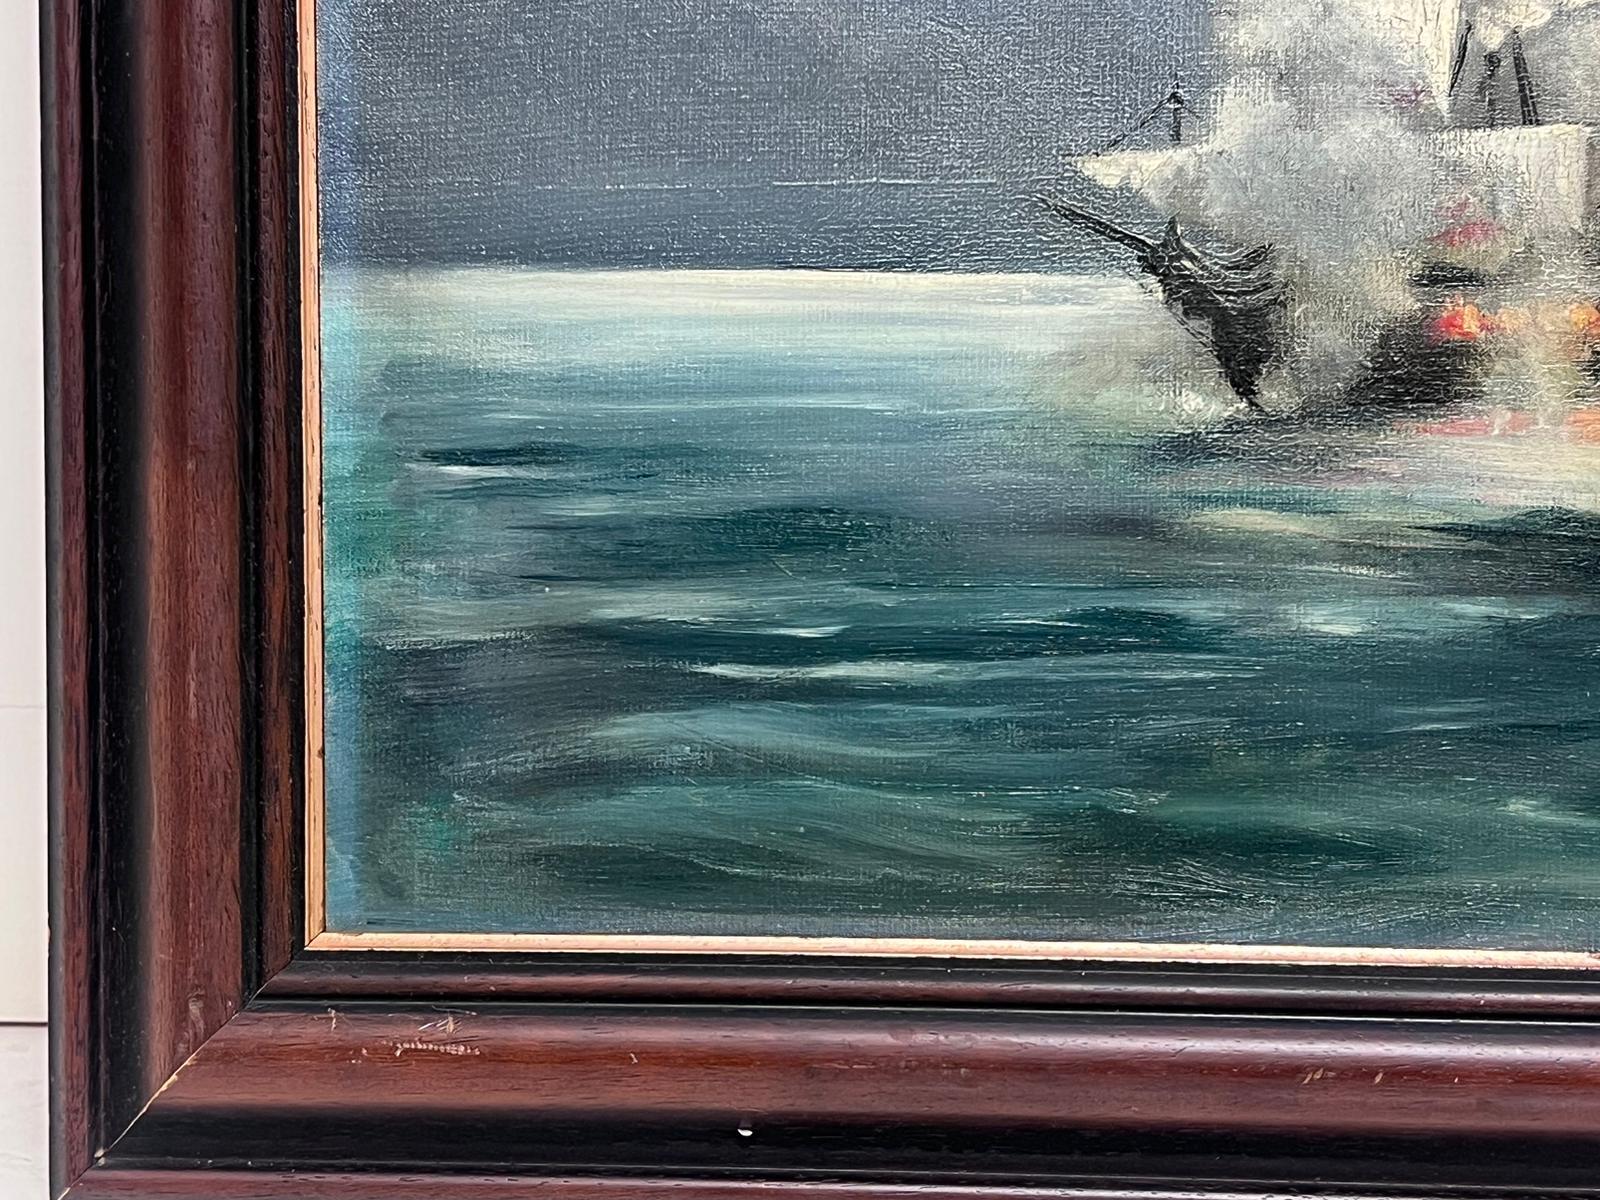 Battle at Sea
by Gordon Wood Armstrong (British late 20th century)
signed oil on board, framed
framed: 23 x 29 inches
board: 18 x 24 inches
provenance: private collection, English
condition: very good and sound condition